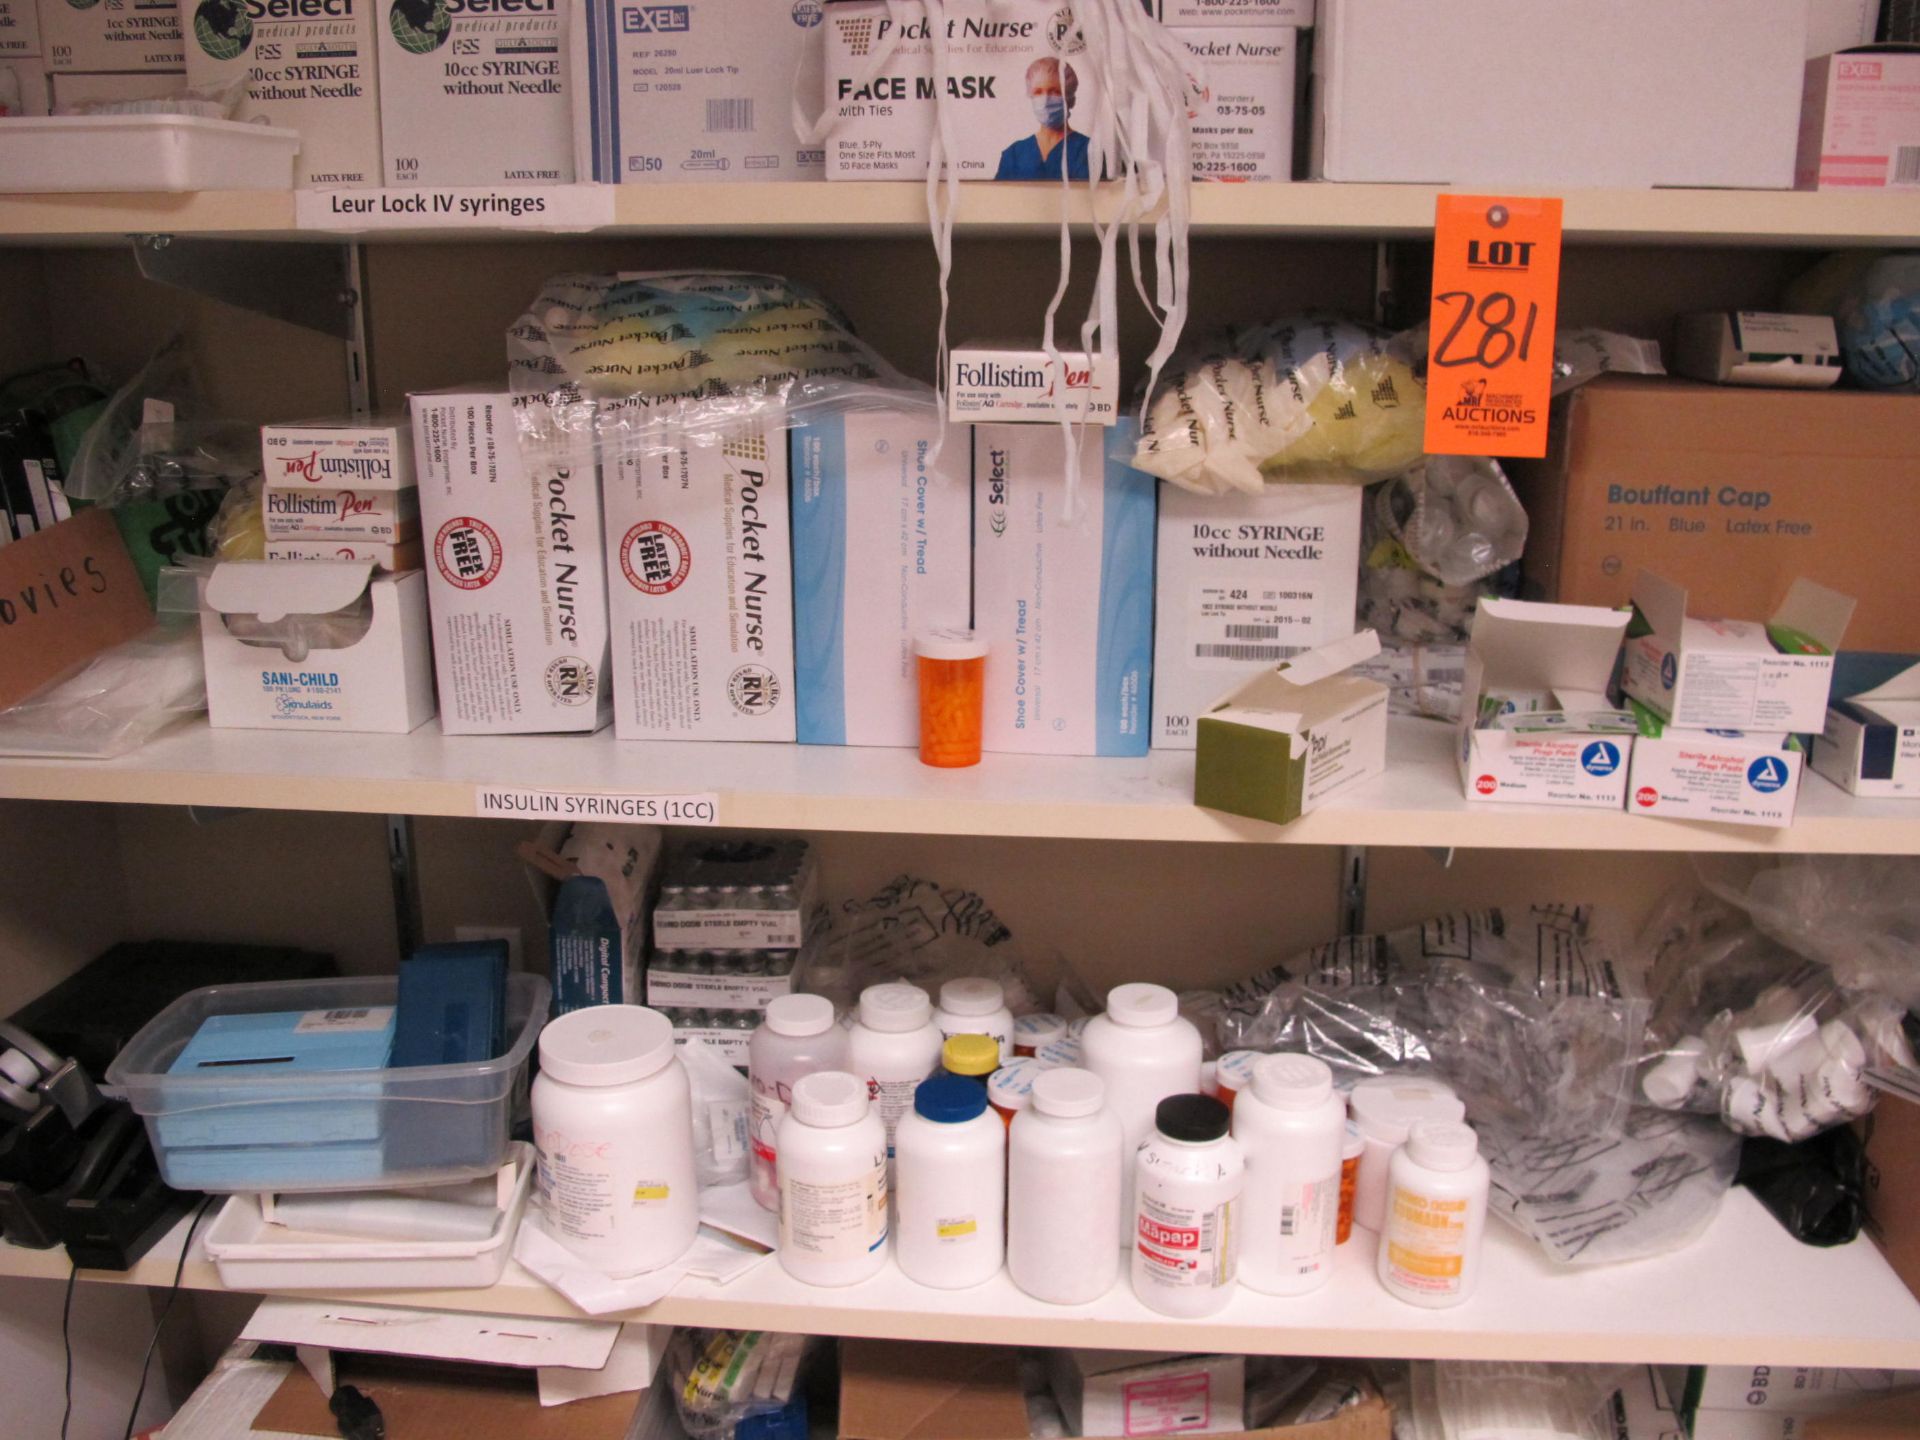 Contents of Closet including Medical Supplies - Image 2 of 4